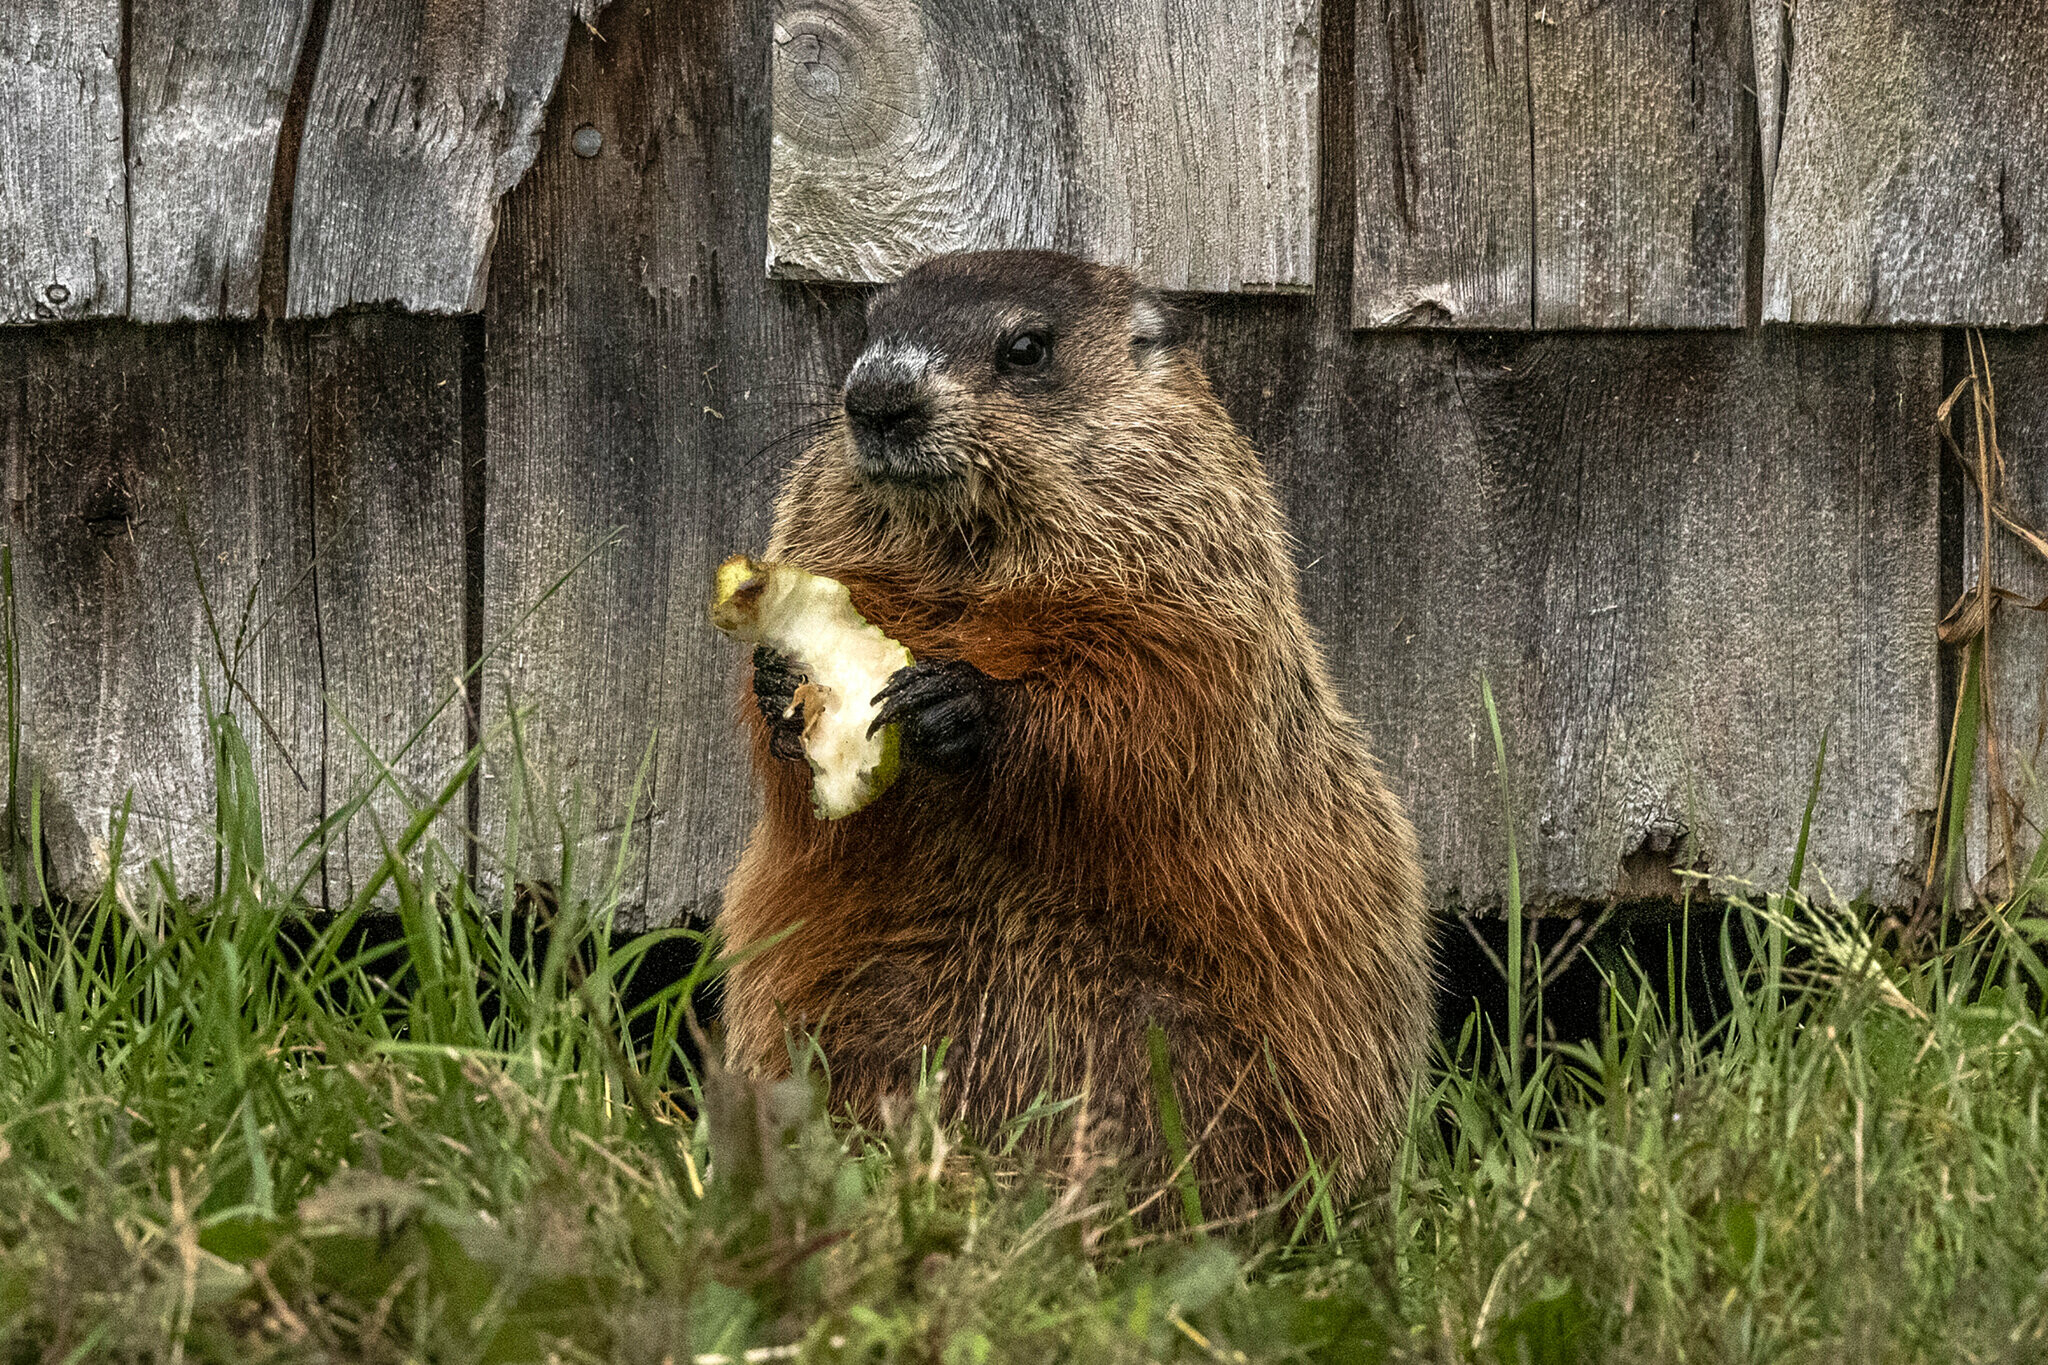 Groundhog Day (Holiday): The event when people look to the groundhogs to predict the weather for the next six weeks. 2050x1370 HD Wallpaper.